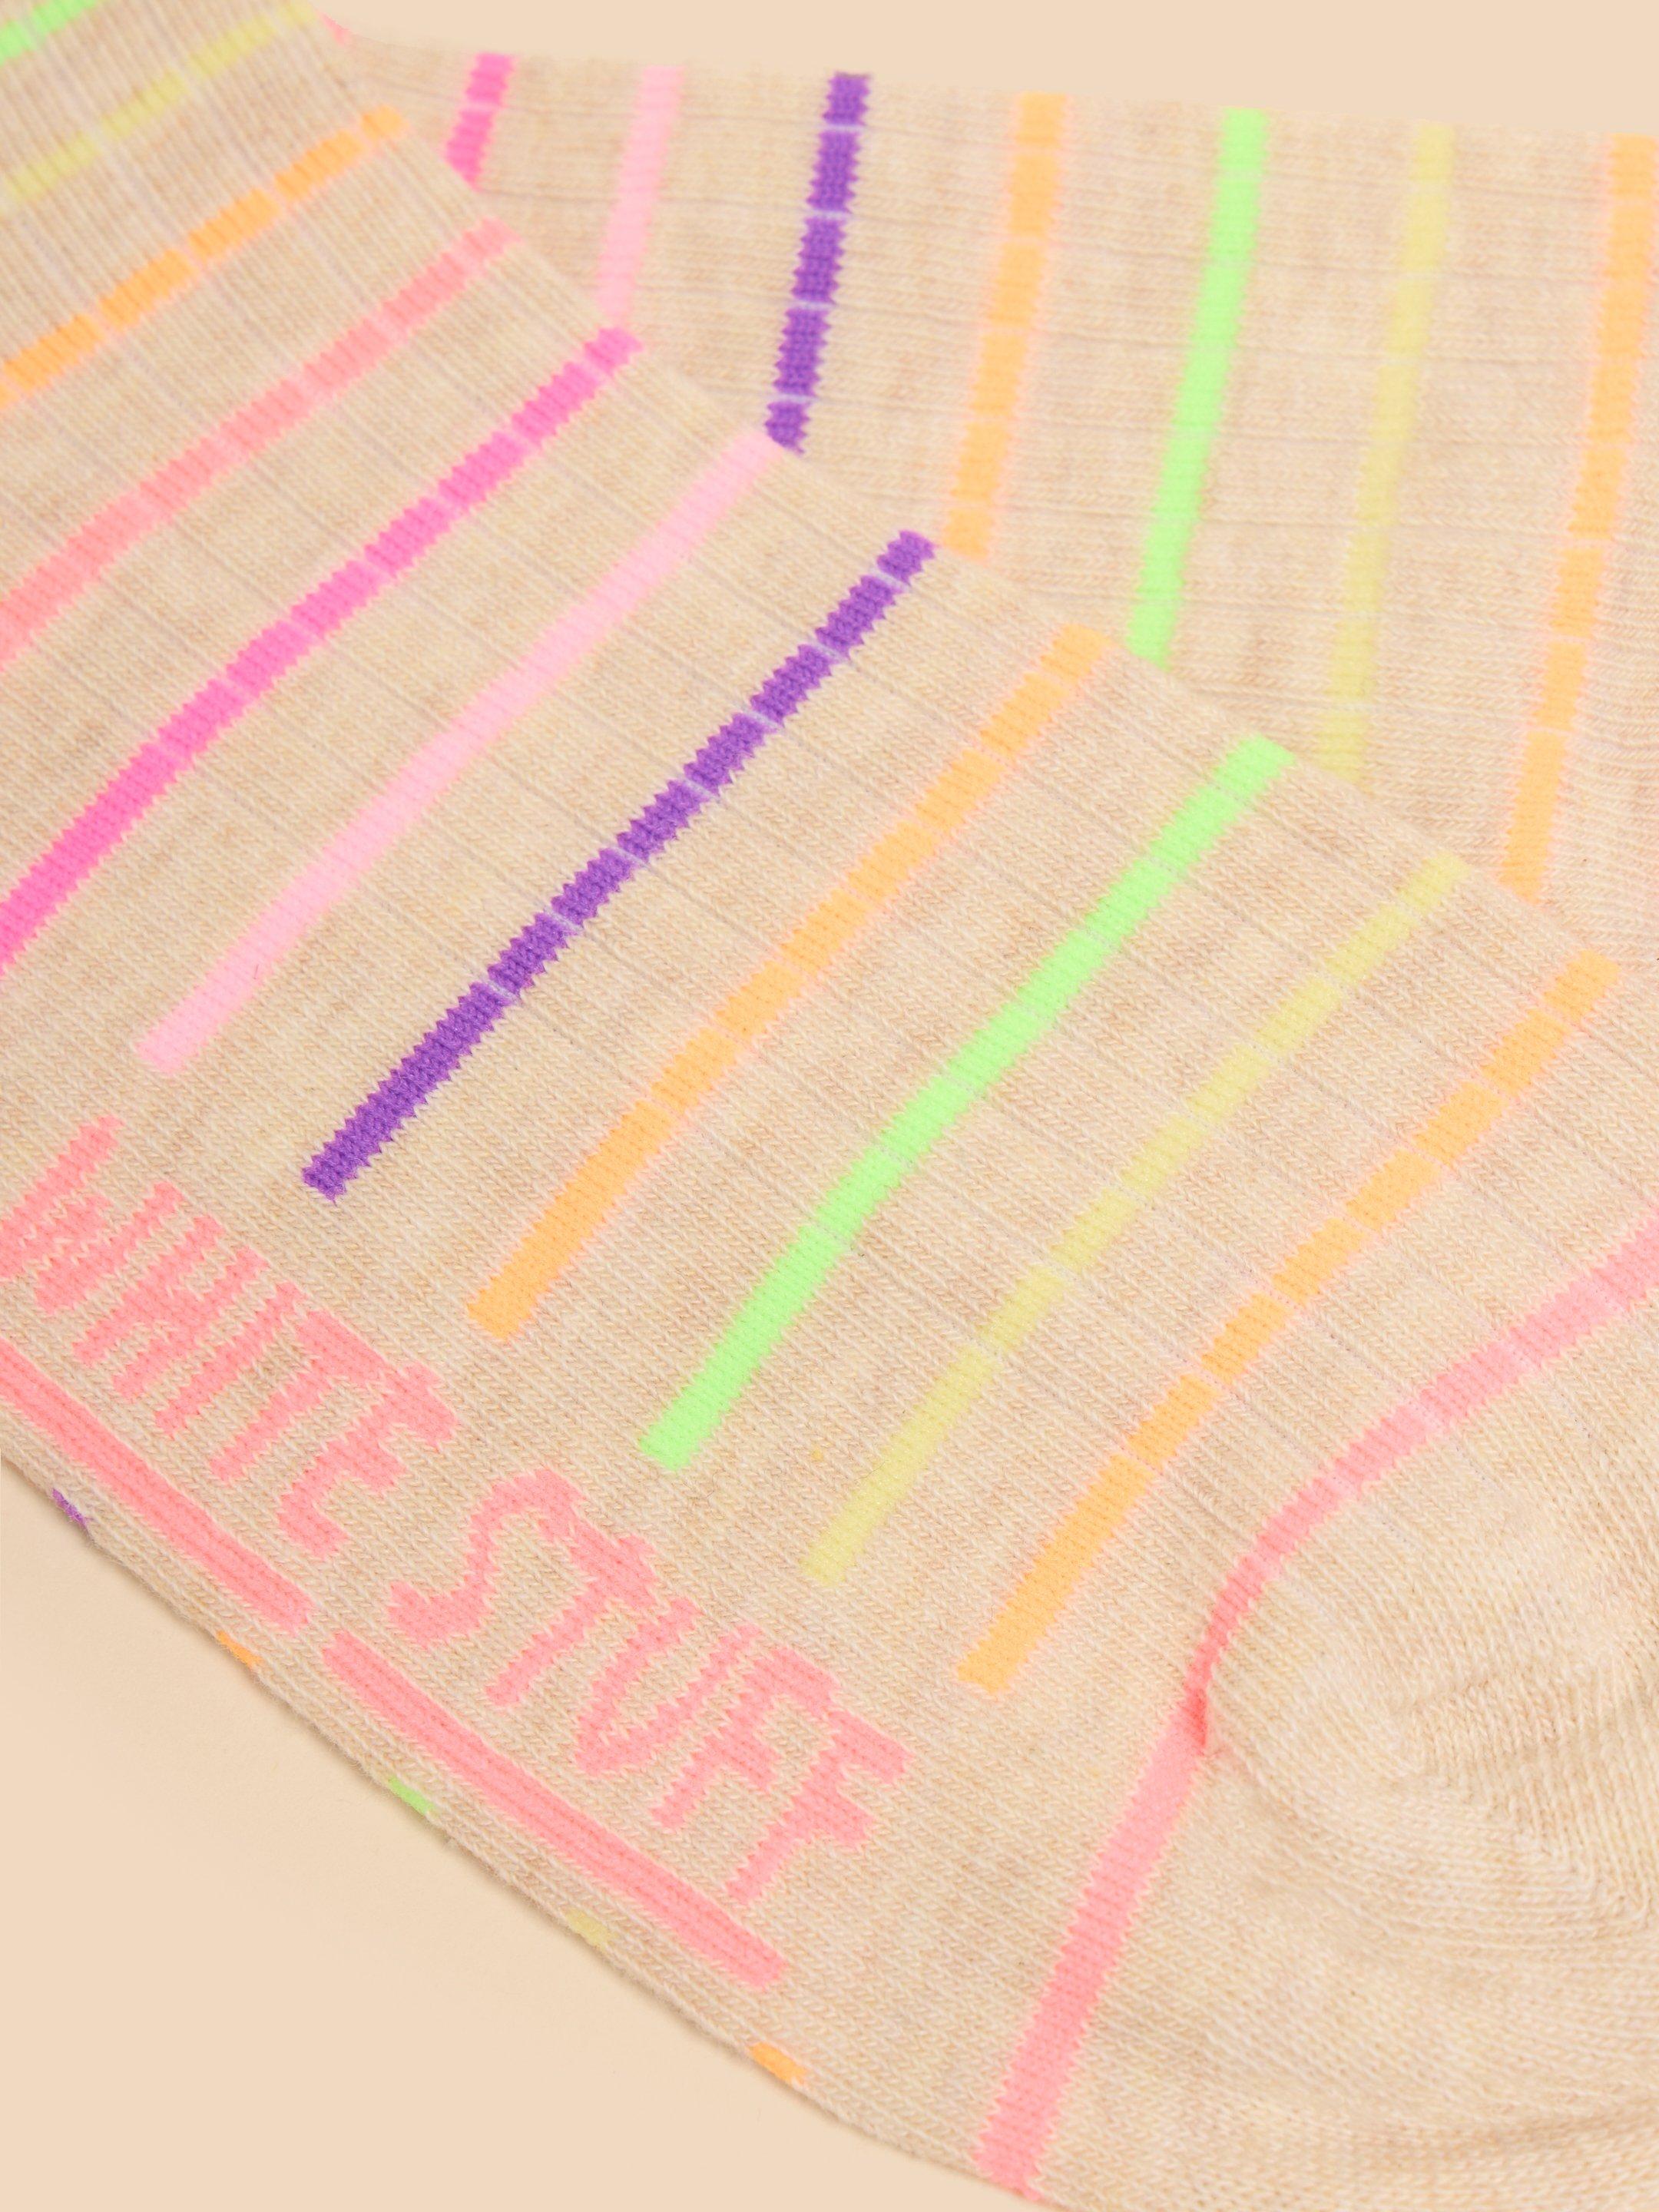 Neon Ribbed Trainer Sock